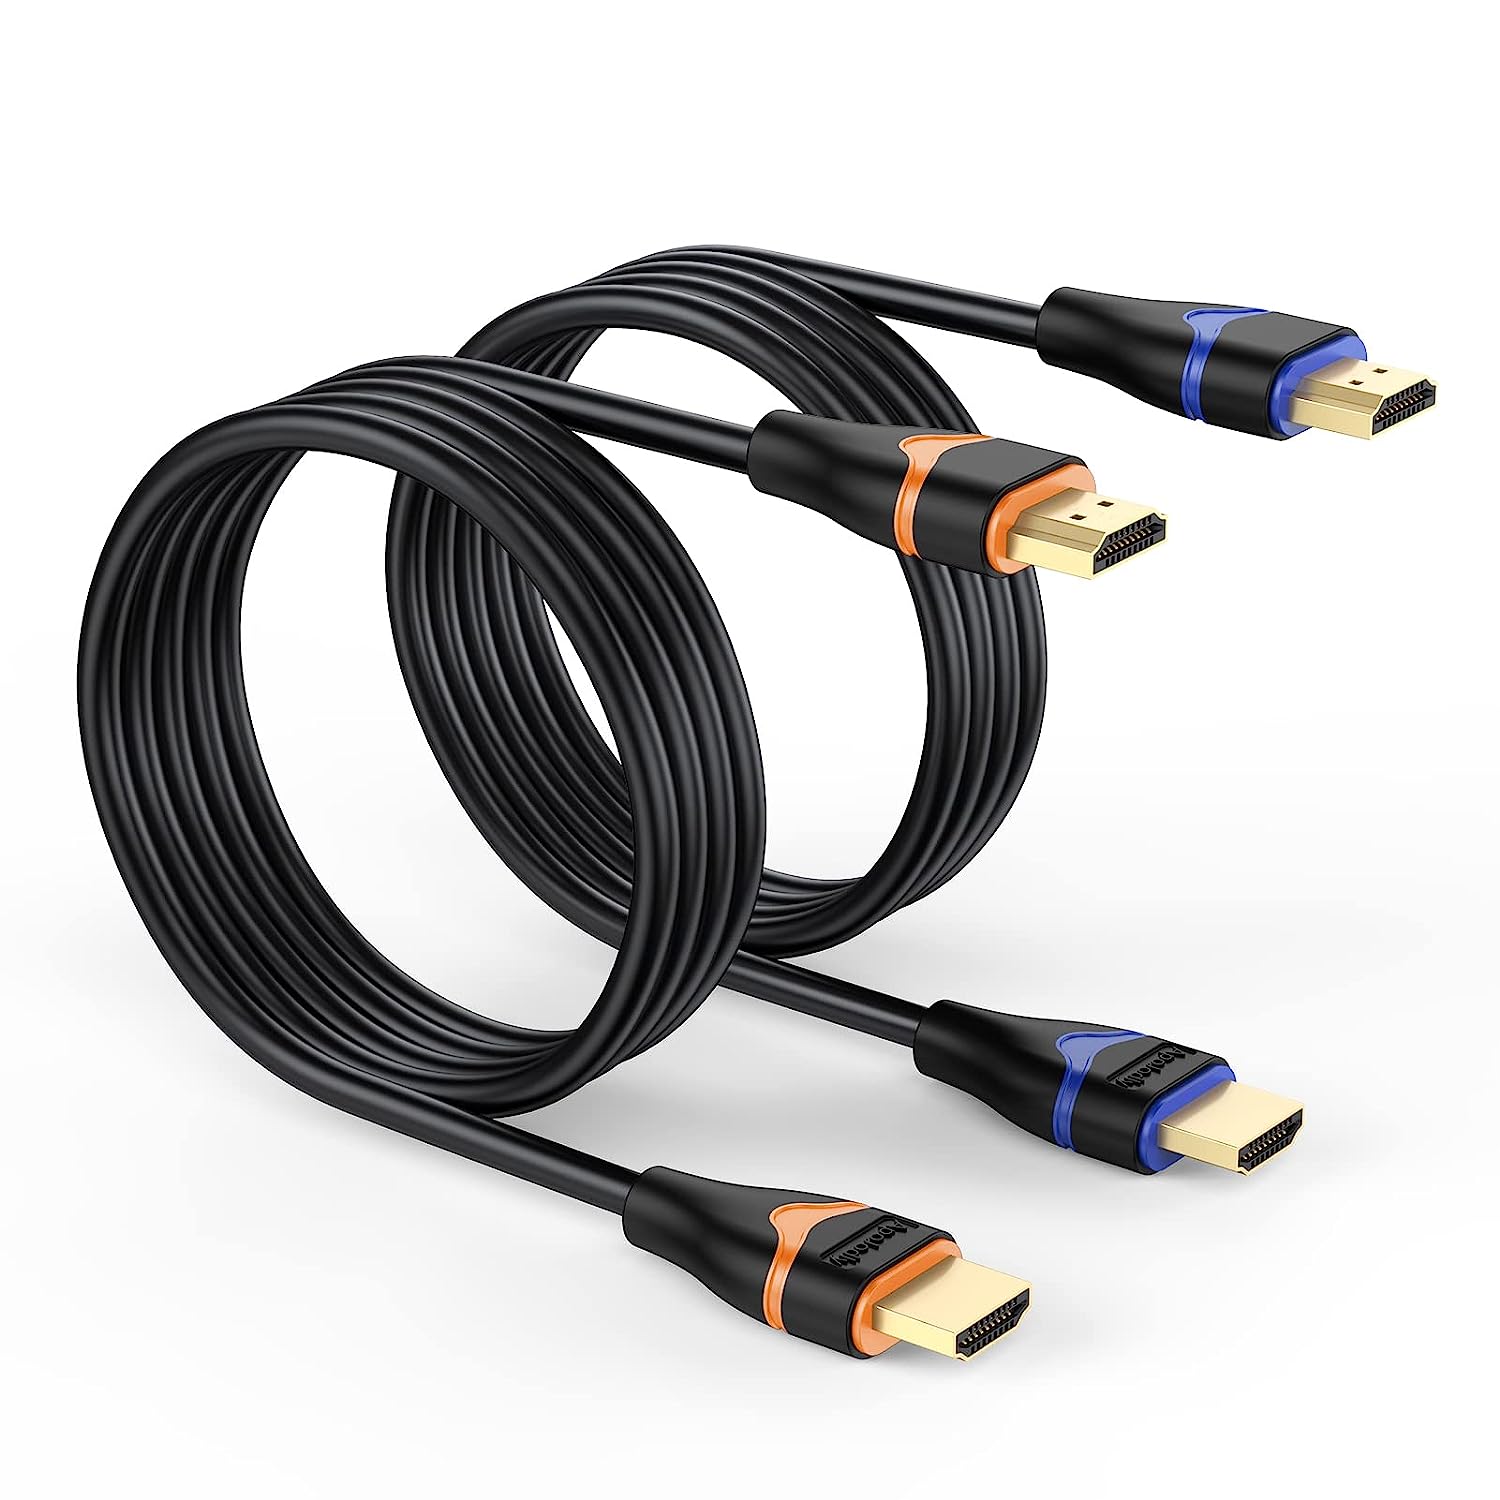 ApoJodly 4K HDMI Cable 6.6FT 2-Pack, HDMI to HDMI [...]